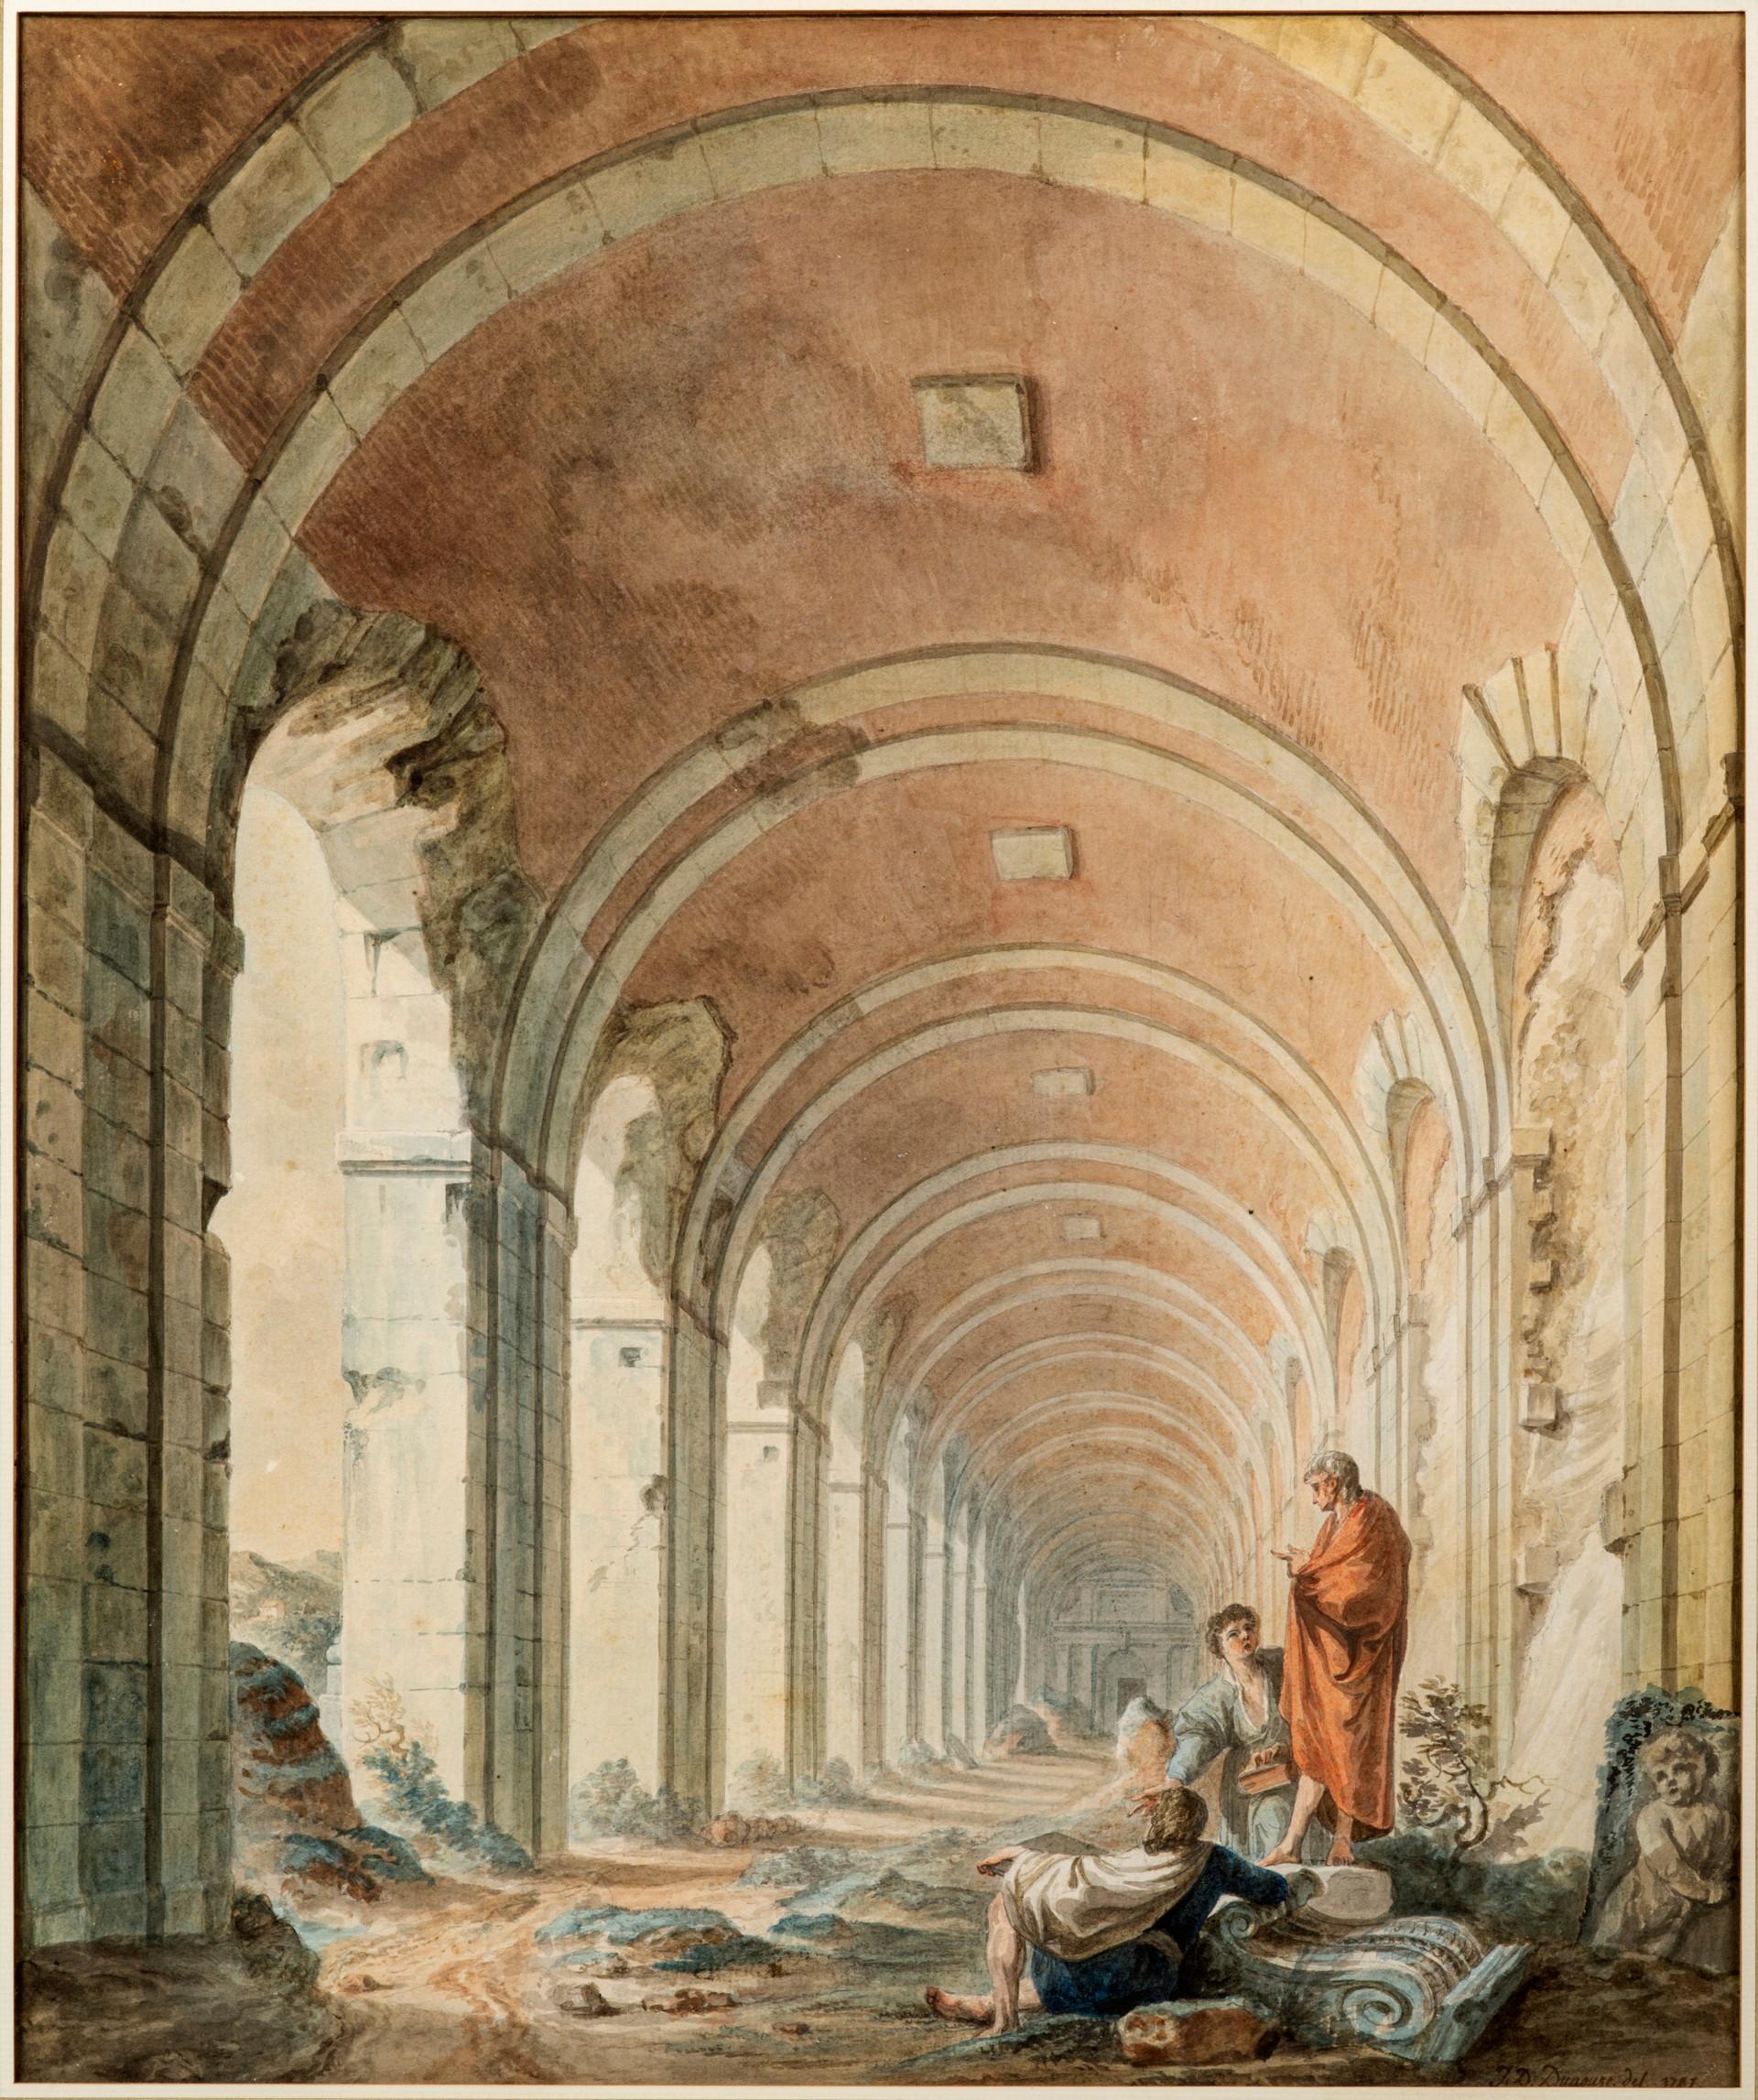 Figures under the terrace of Saint-Germain-en-Laye, watercolour, signed and dated lower right 'J. D. Dugourc del 1781'
Watercolor on paper, with pencil.
Jean-Démosthène Dugourc (Versailles, 23 September 1749 – Paris, 30 April 1825), was a talented